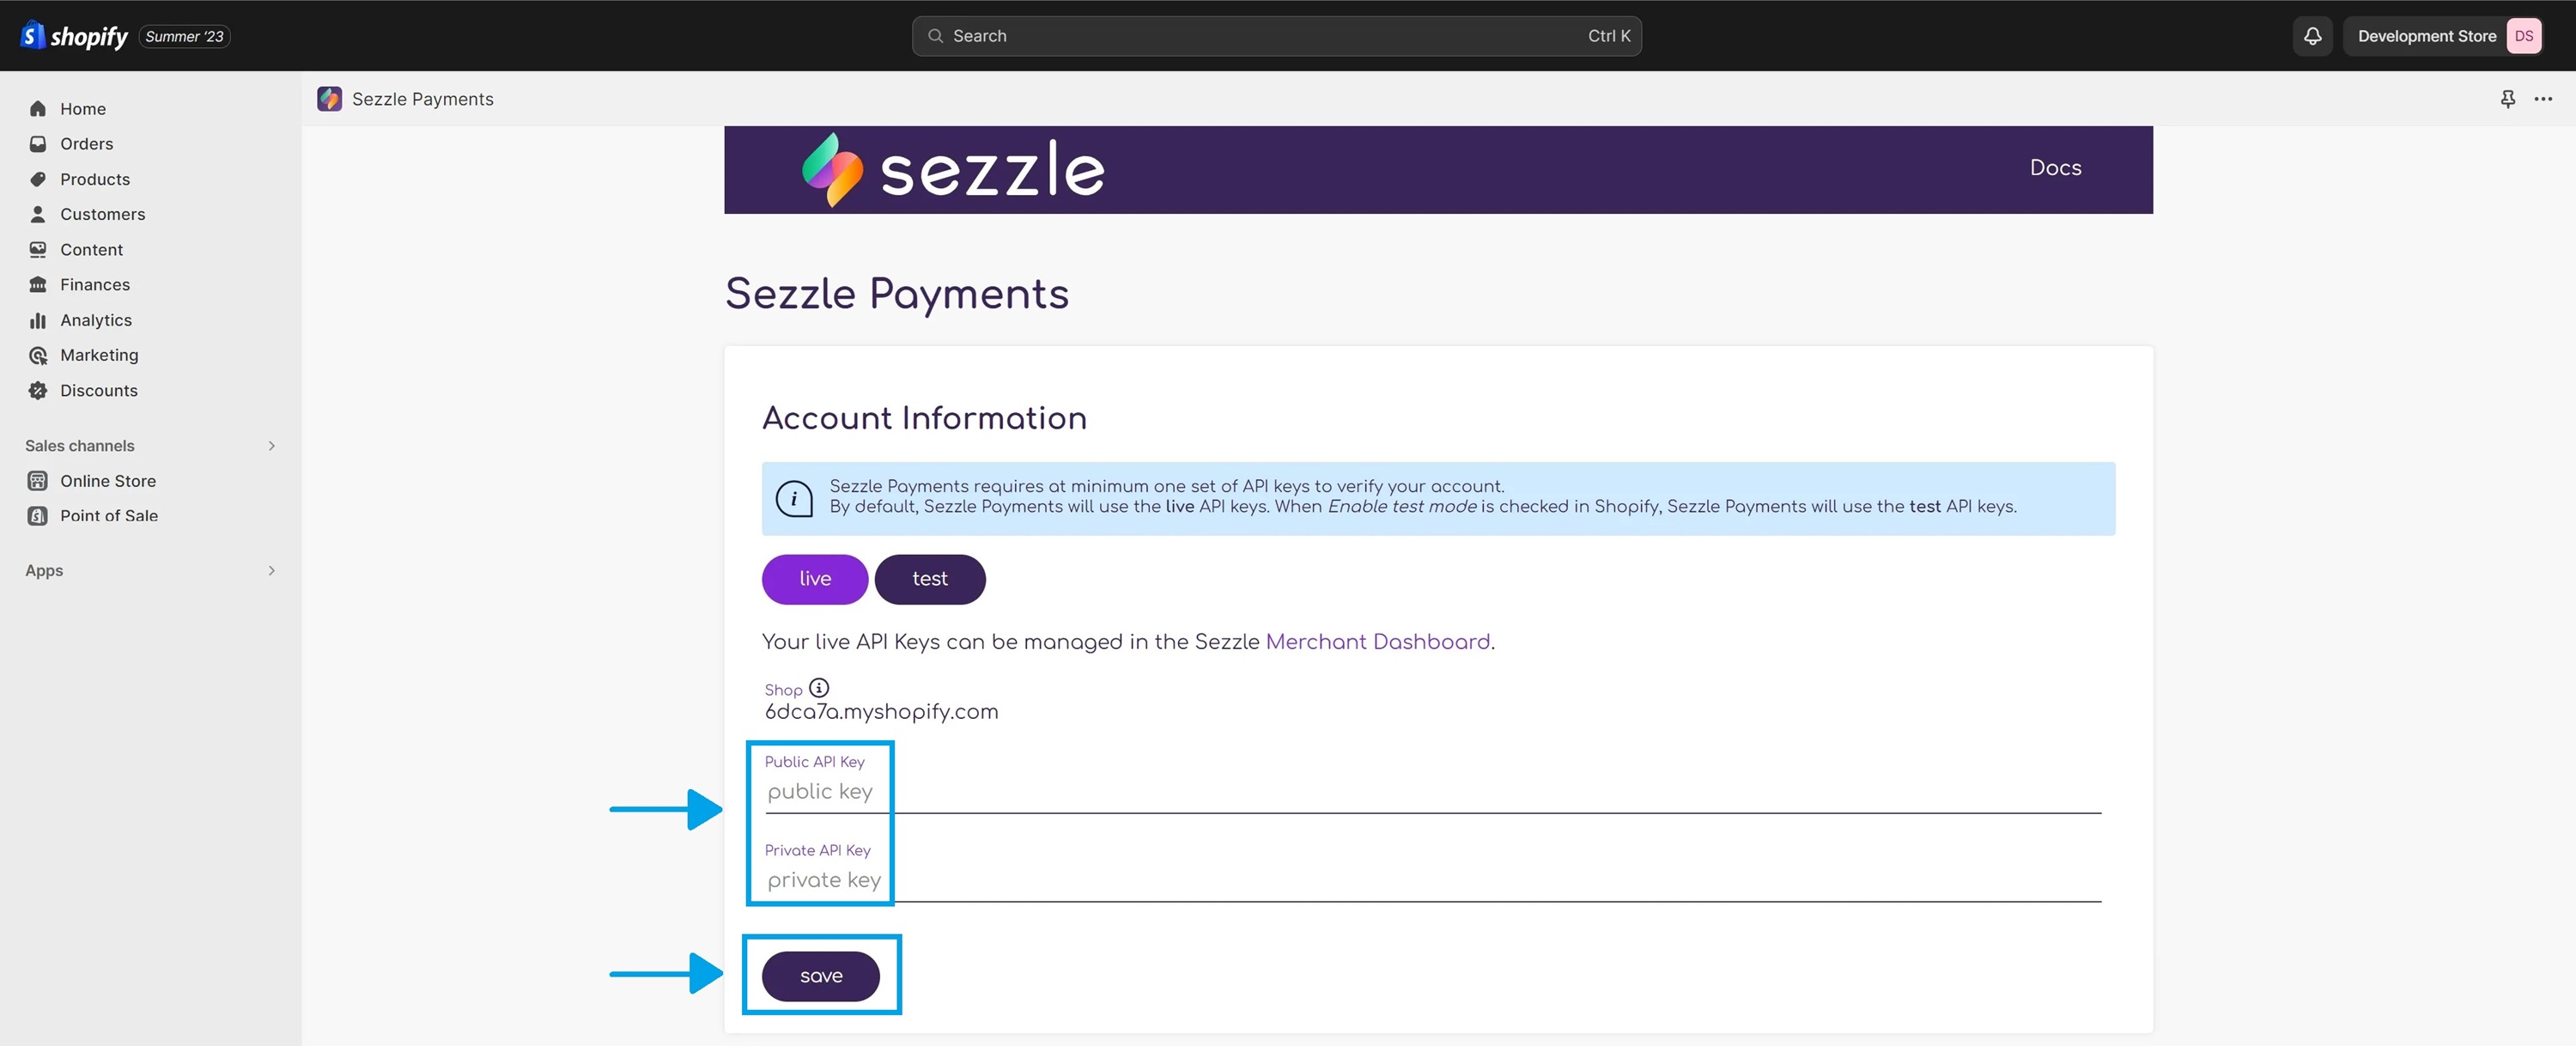 KeepShoppers screenshot: Adding API keys to link Sezzle to your Shopify store